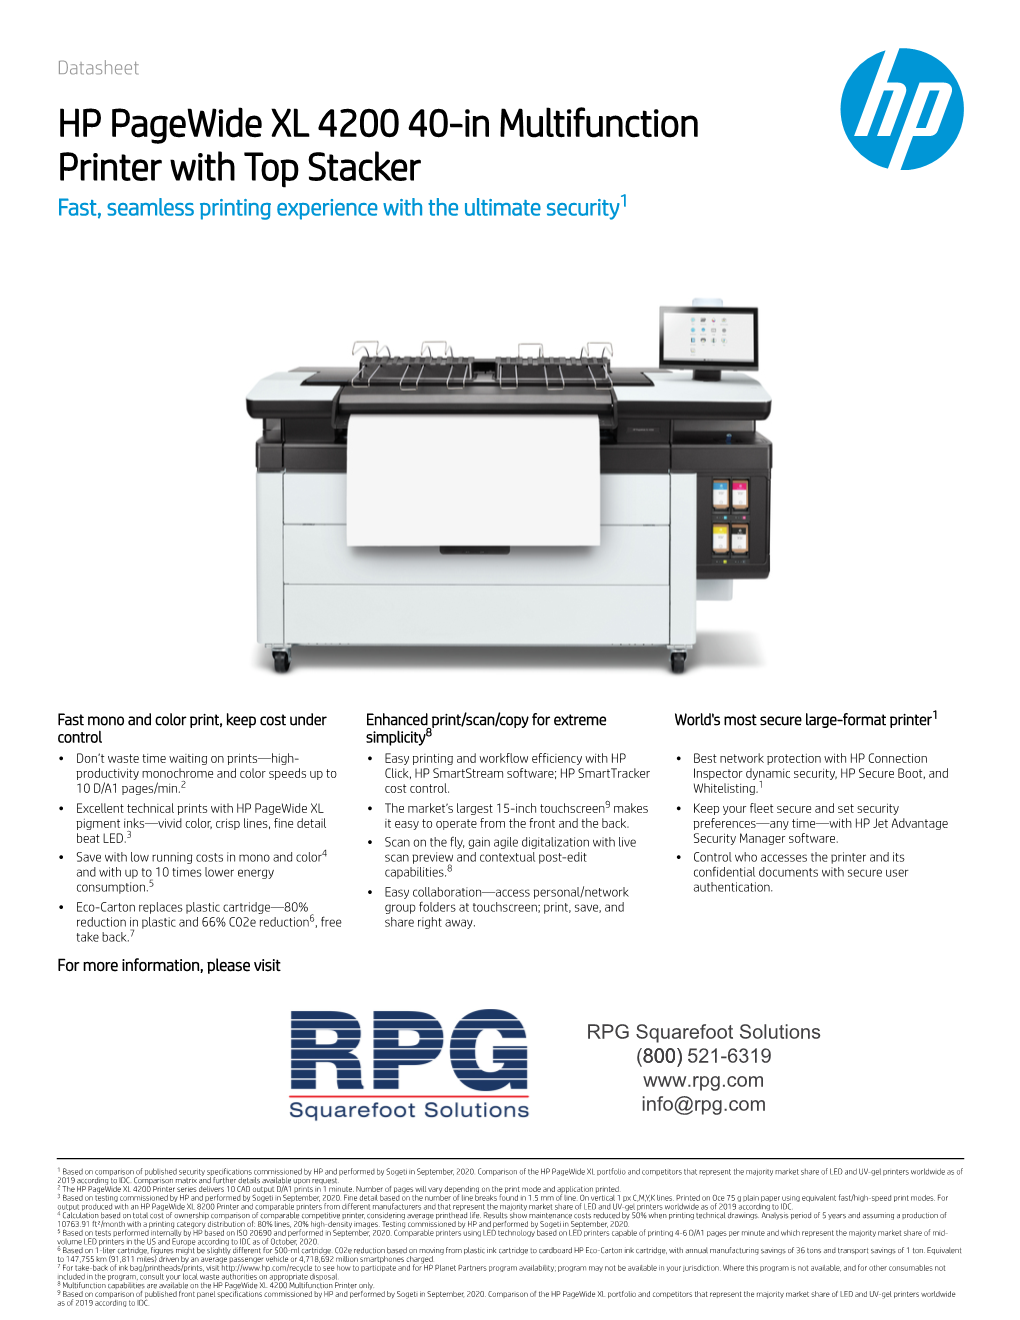 HP Pagewide XL 4200 40-In Multifunction Printer with Top Stacker Fast, Seamless Printing Experience with the Ultimate Security1